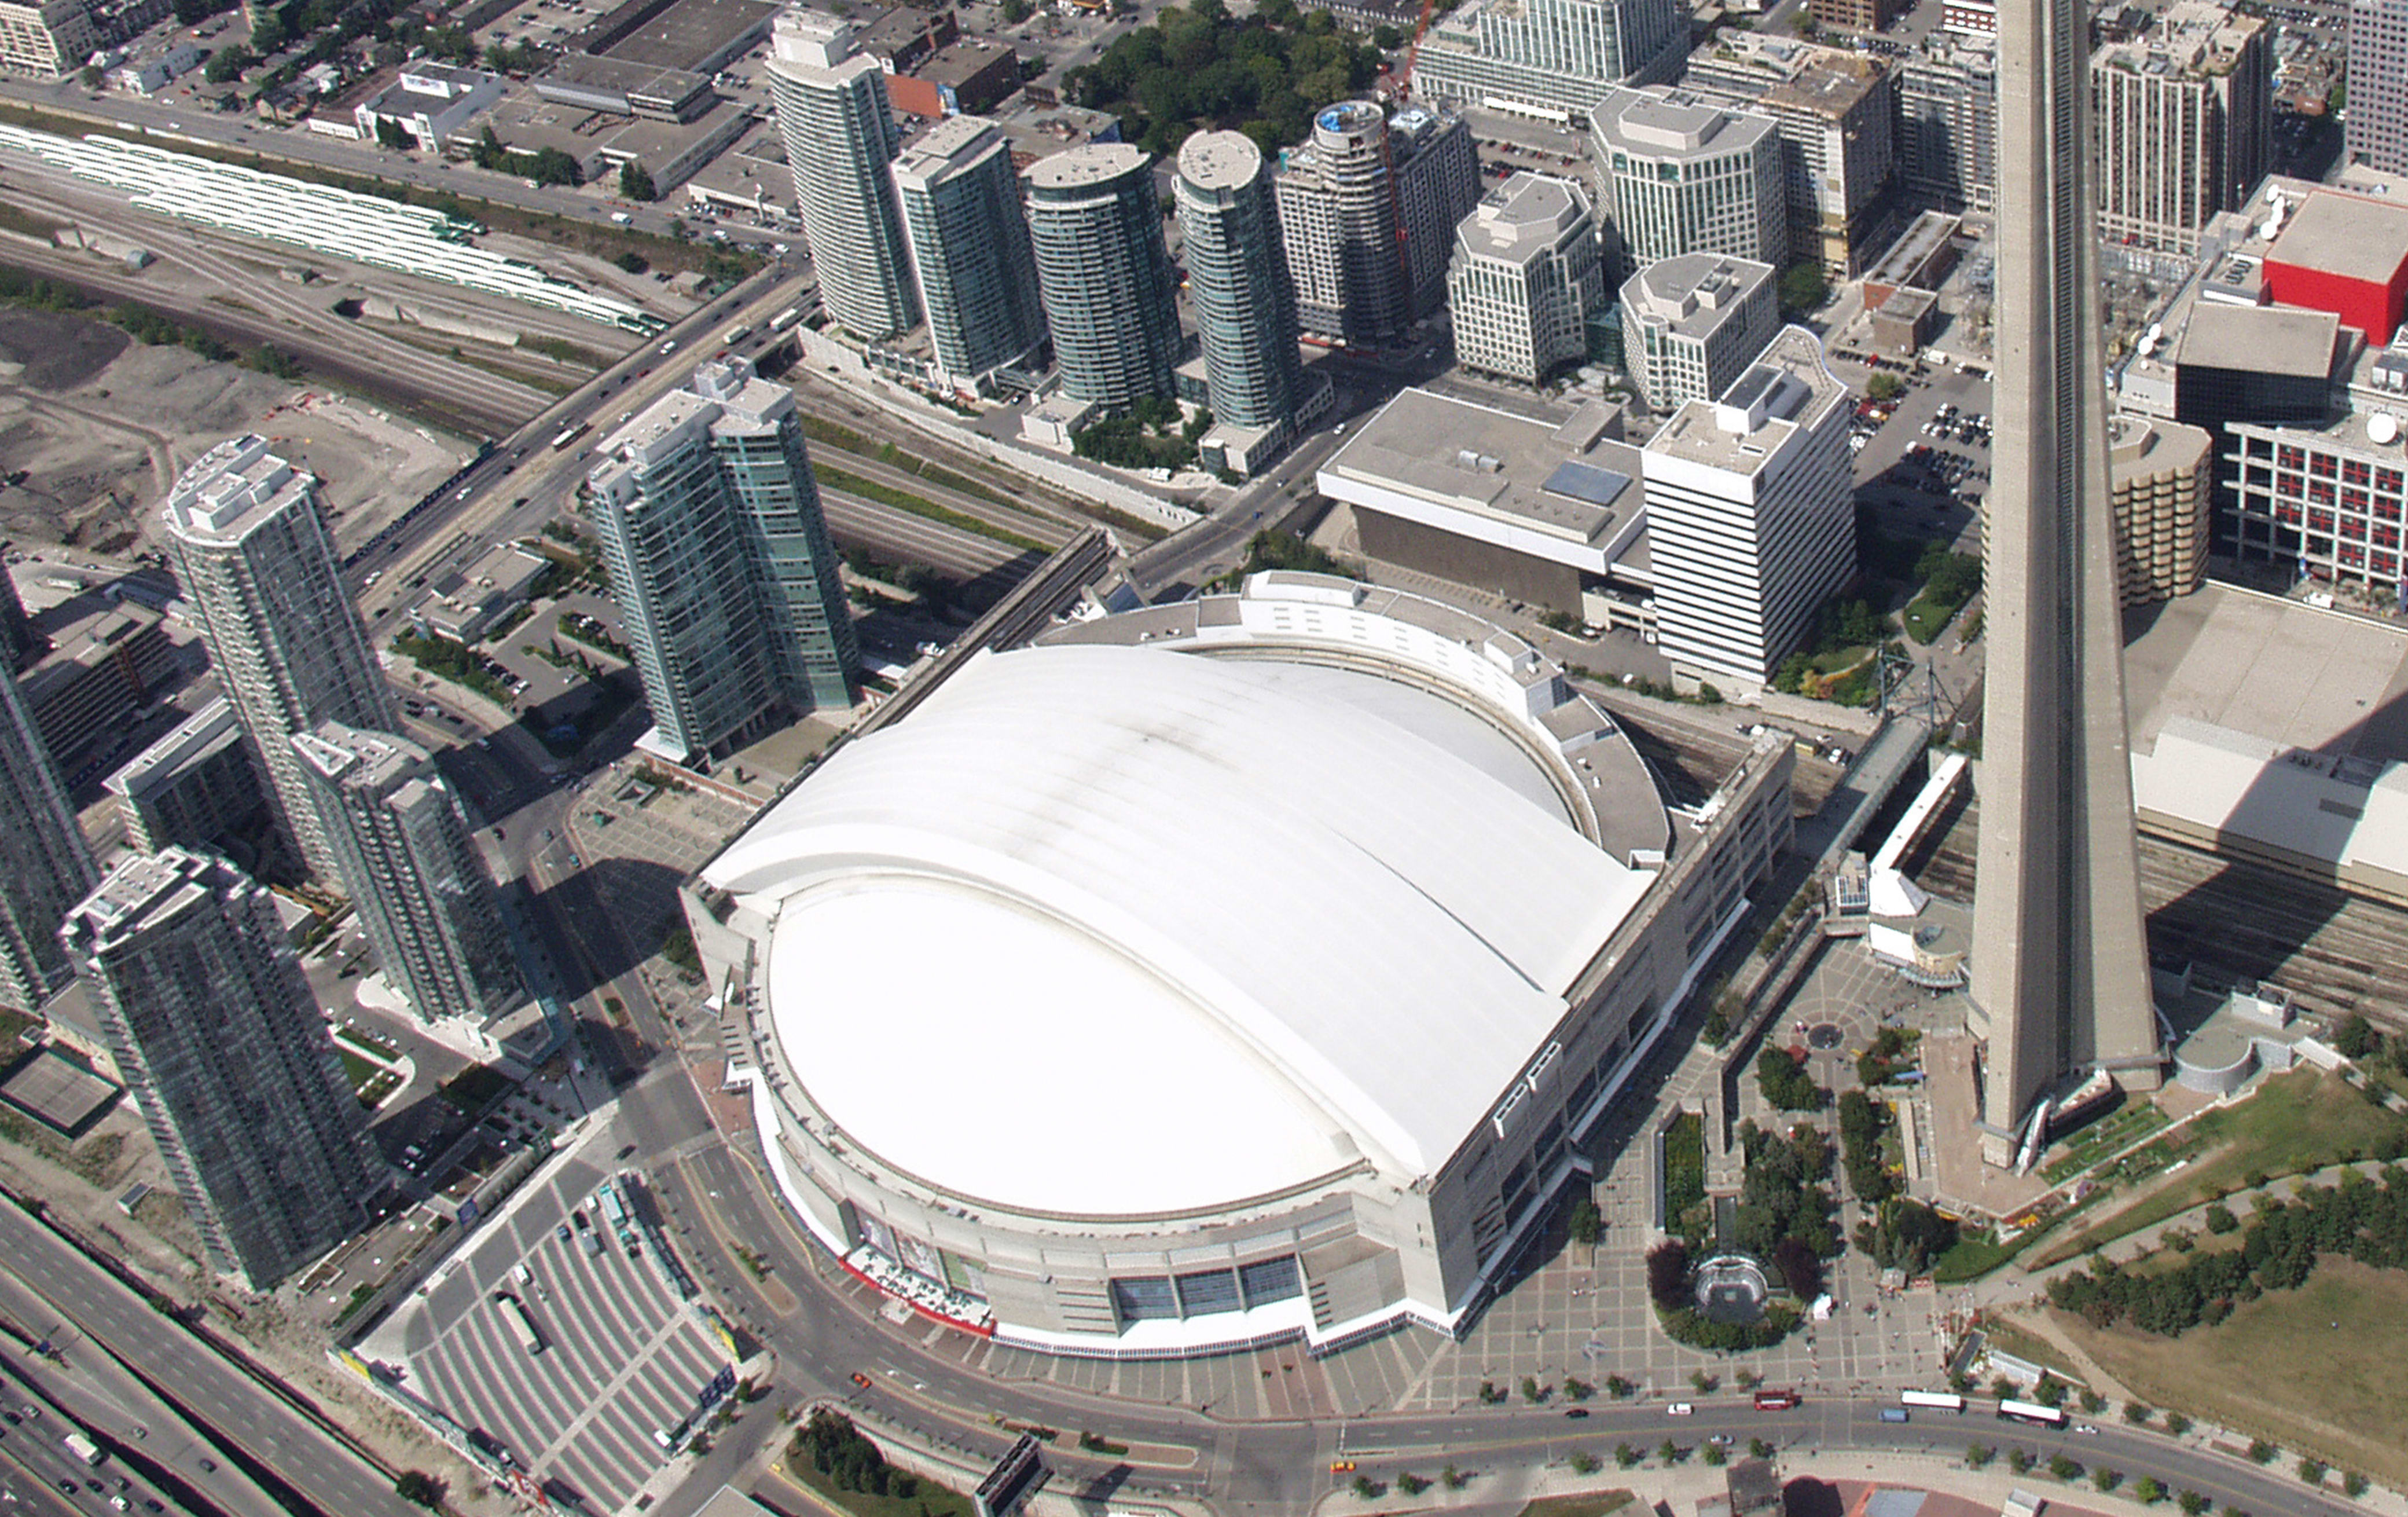 Rogers Centre (Skydome) streetscapes by Gazzola Paving